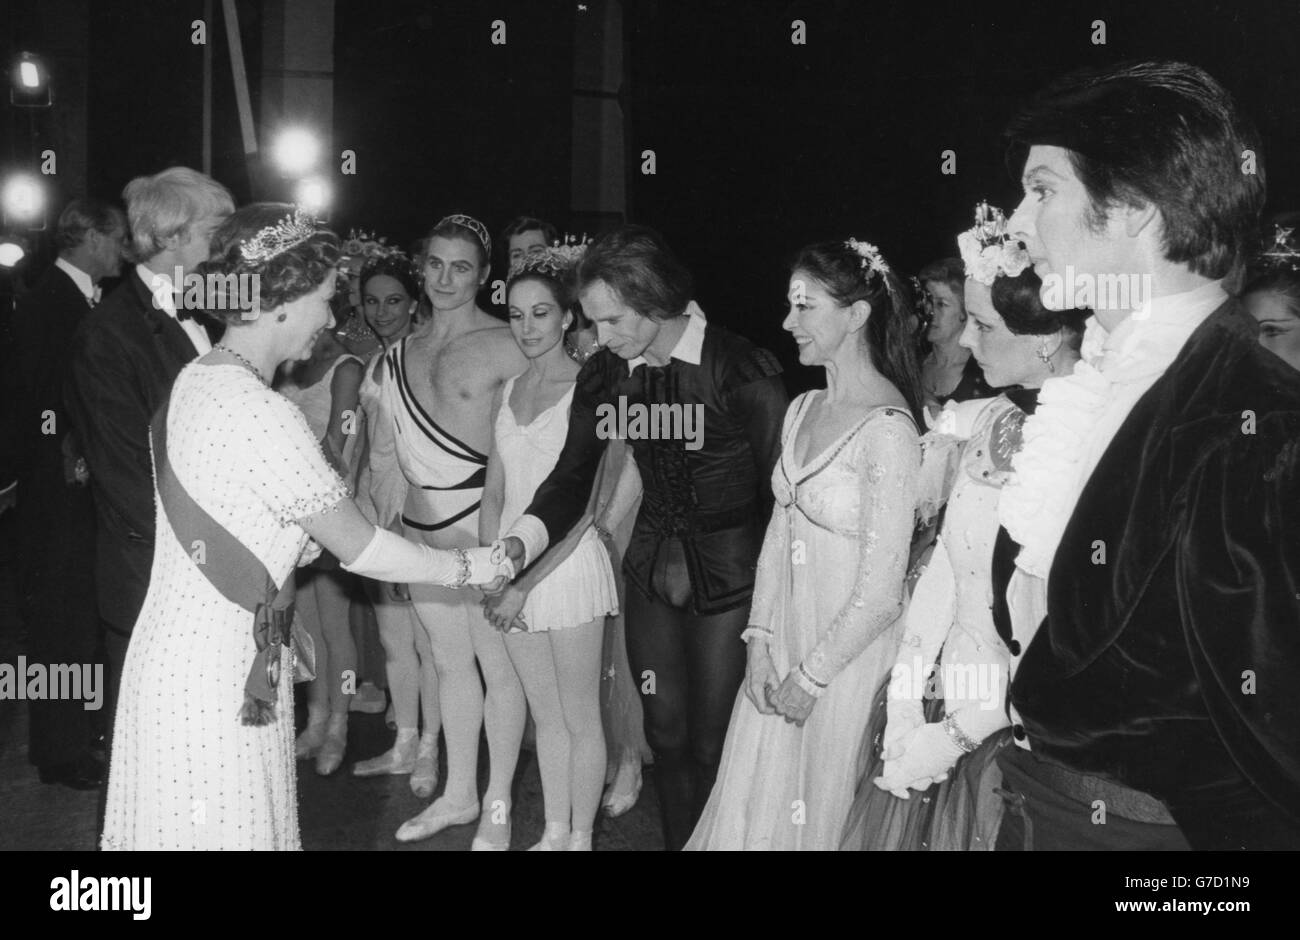 The Queen meets Rudolf Nureyev and Dame Margot Fonteyn at the Royal Opera House in Covent Garden, where members of the Royal Family attended a Gala Silver Jubilee Performance of opera and ballet. Stock Photo